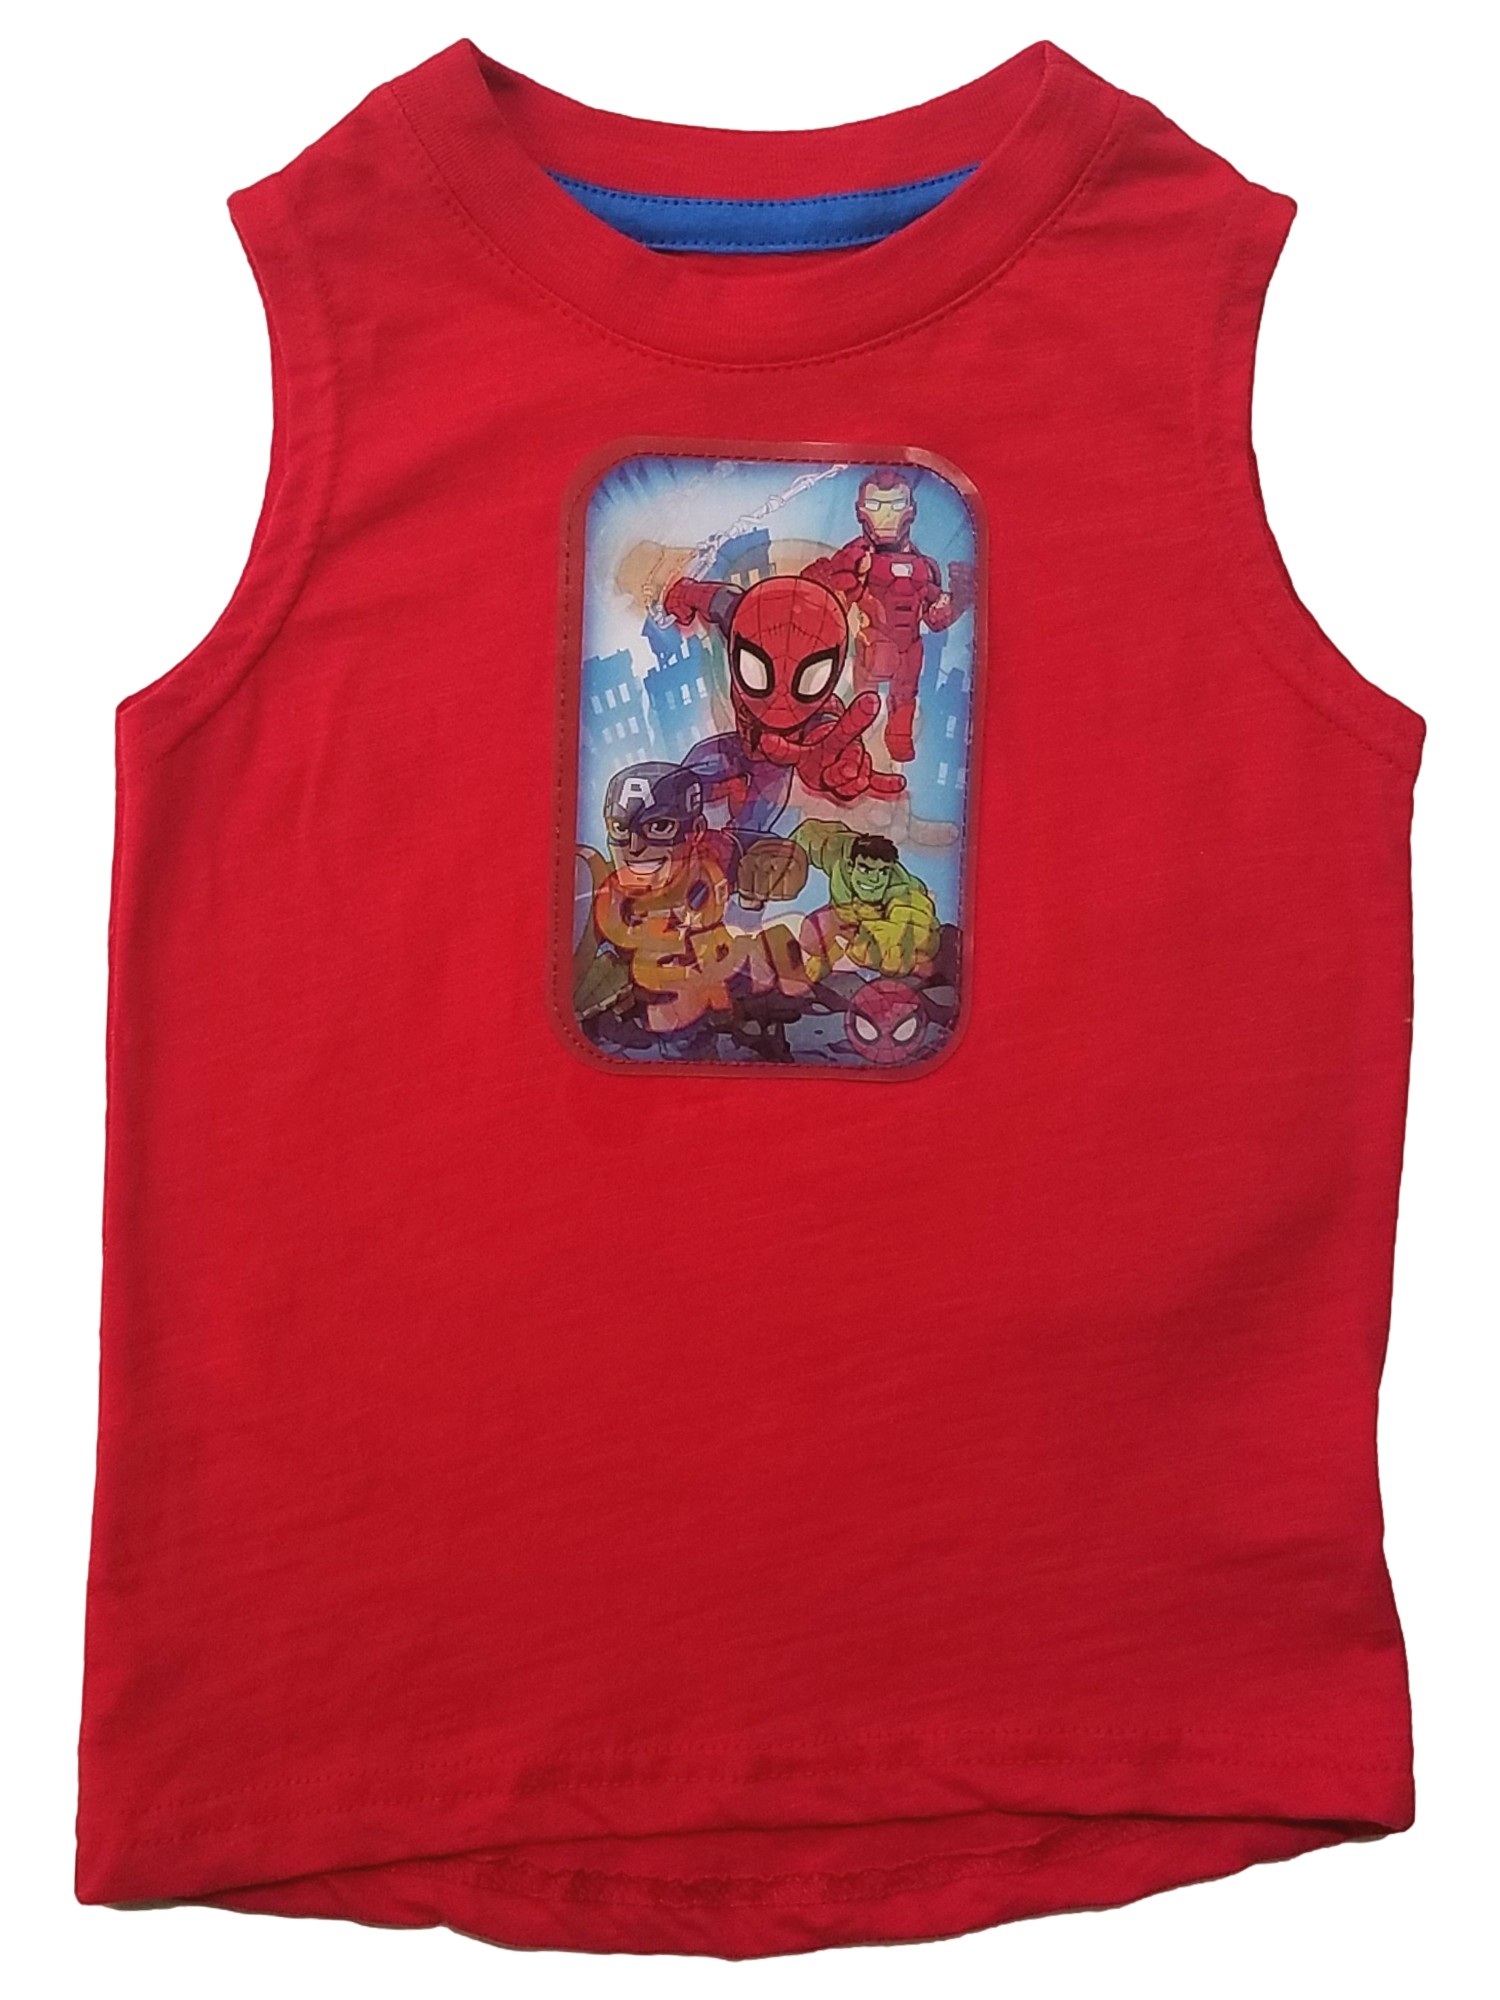 Marvel Toddler Boys Red Spiderman Tank Top Tee Shirt T-Shirt Size 2T